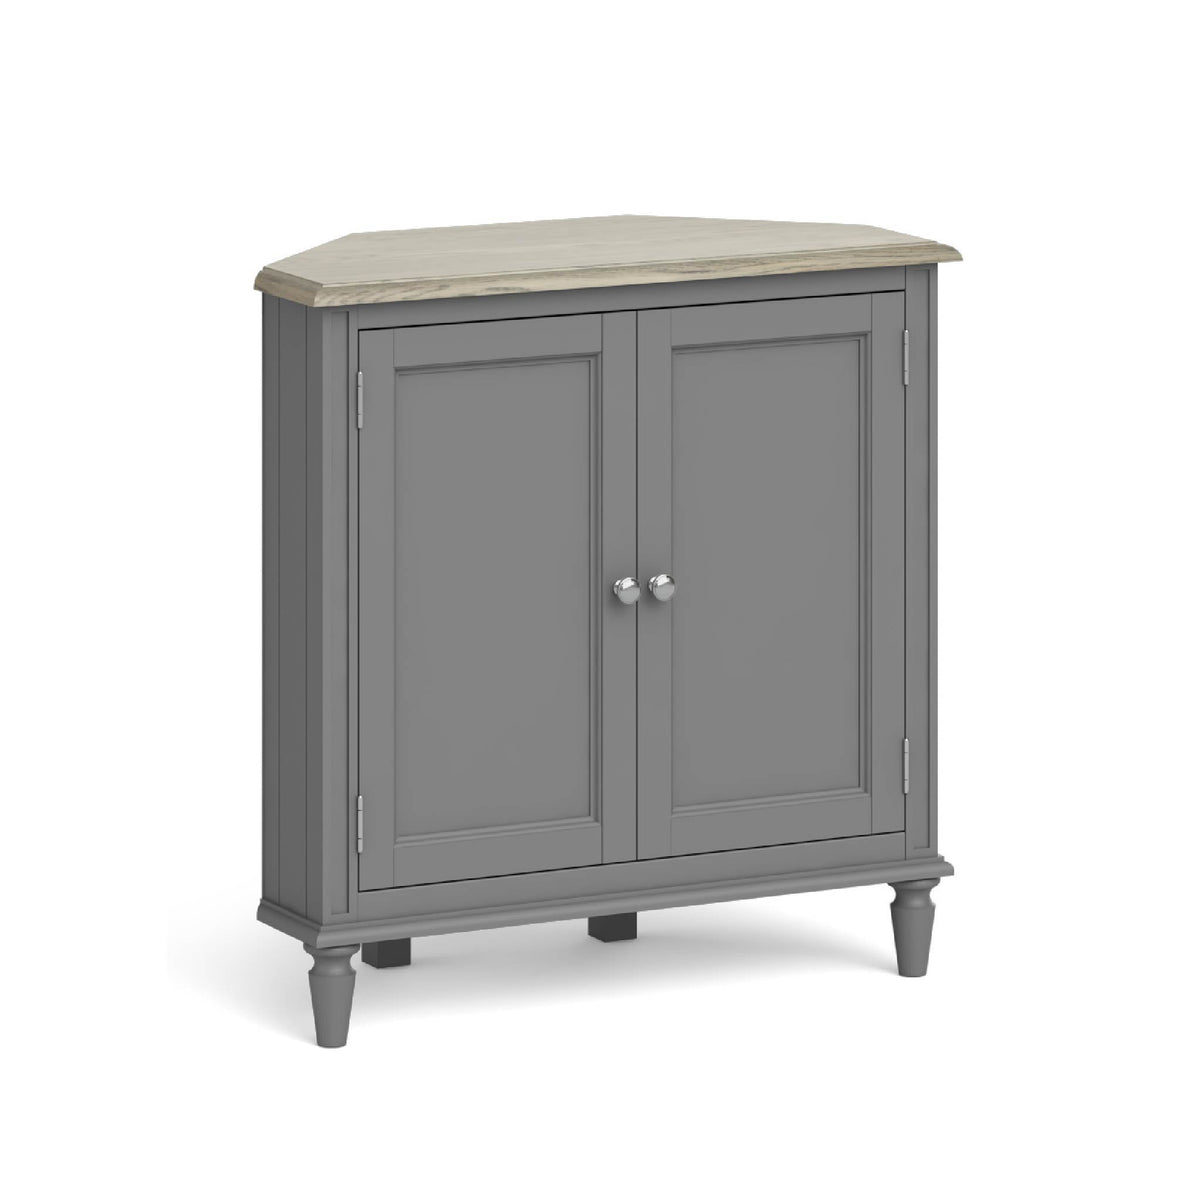 The Mulsanne Grey French Style Wooden Corner Cupboard from Roseland Furniture